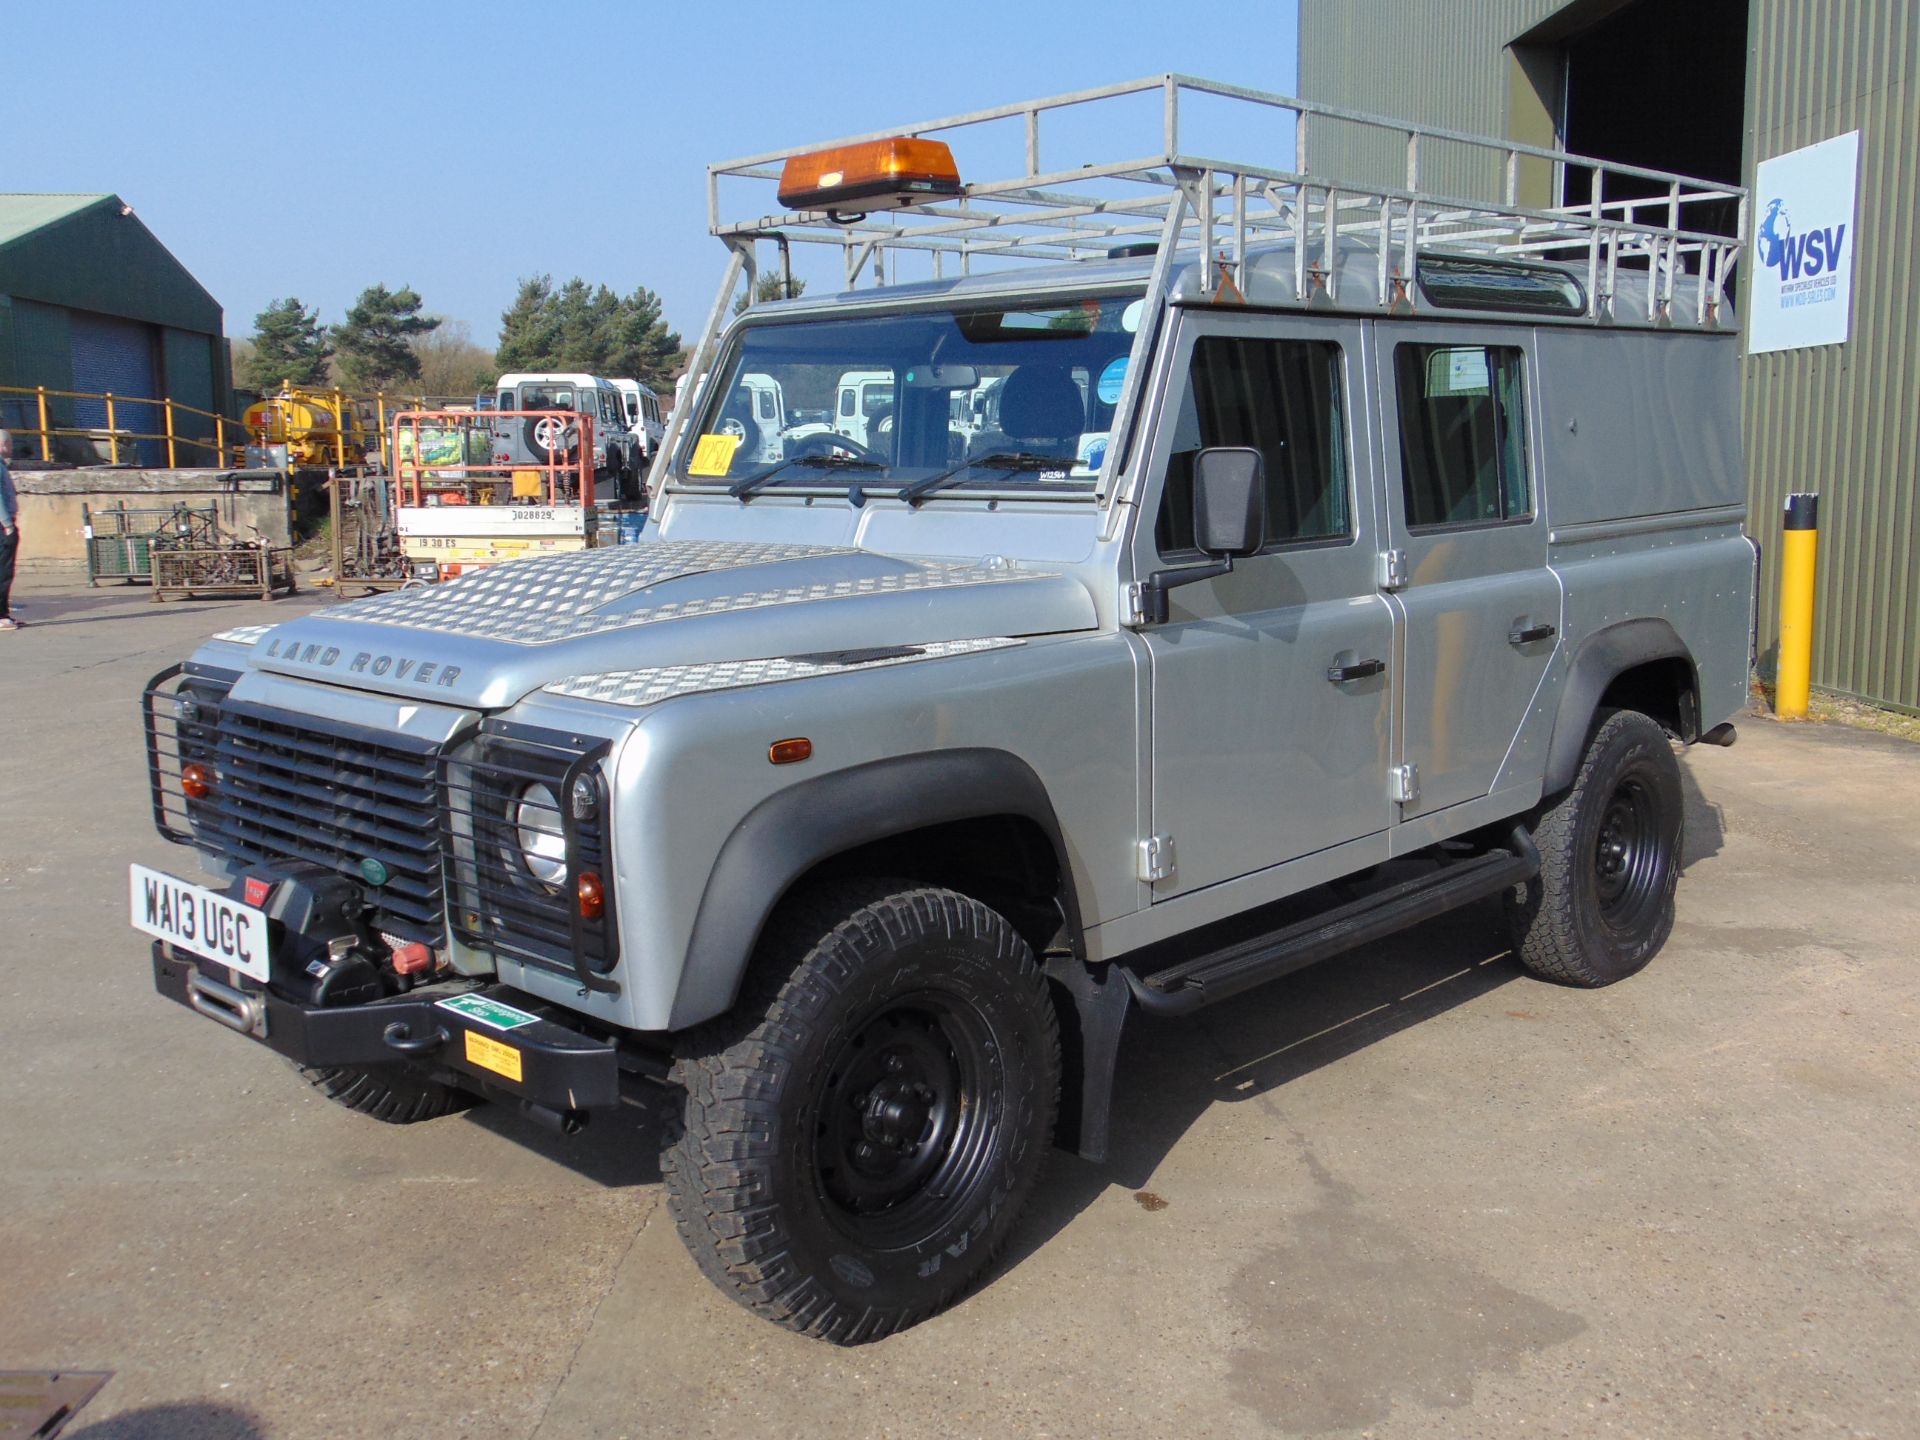 1 Owner 2013 Land Rover Defender 110 2.2 County Utility 5 door 5 seater - ONLY 83,117 MILES! - Image 3 of 33